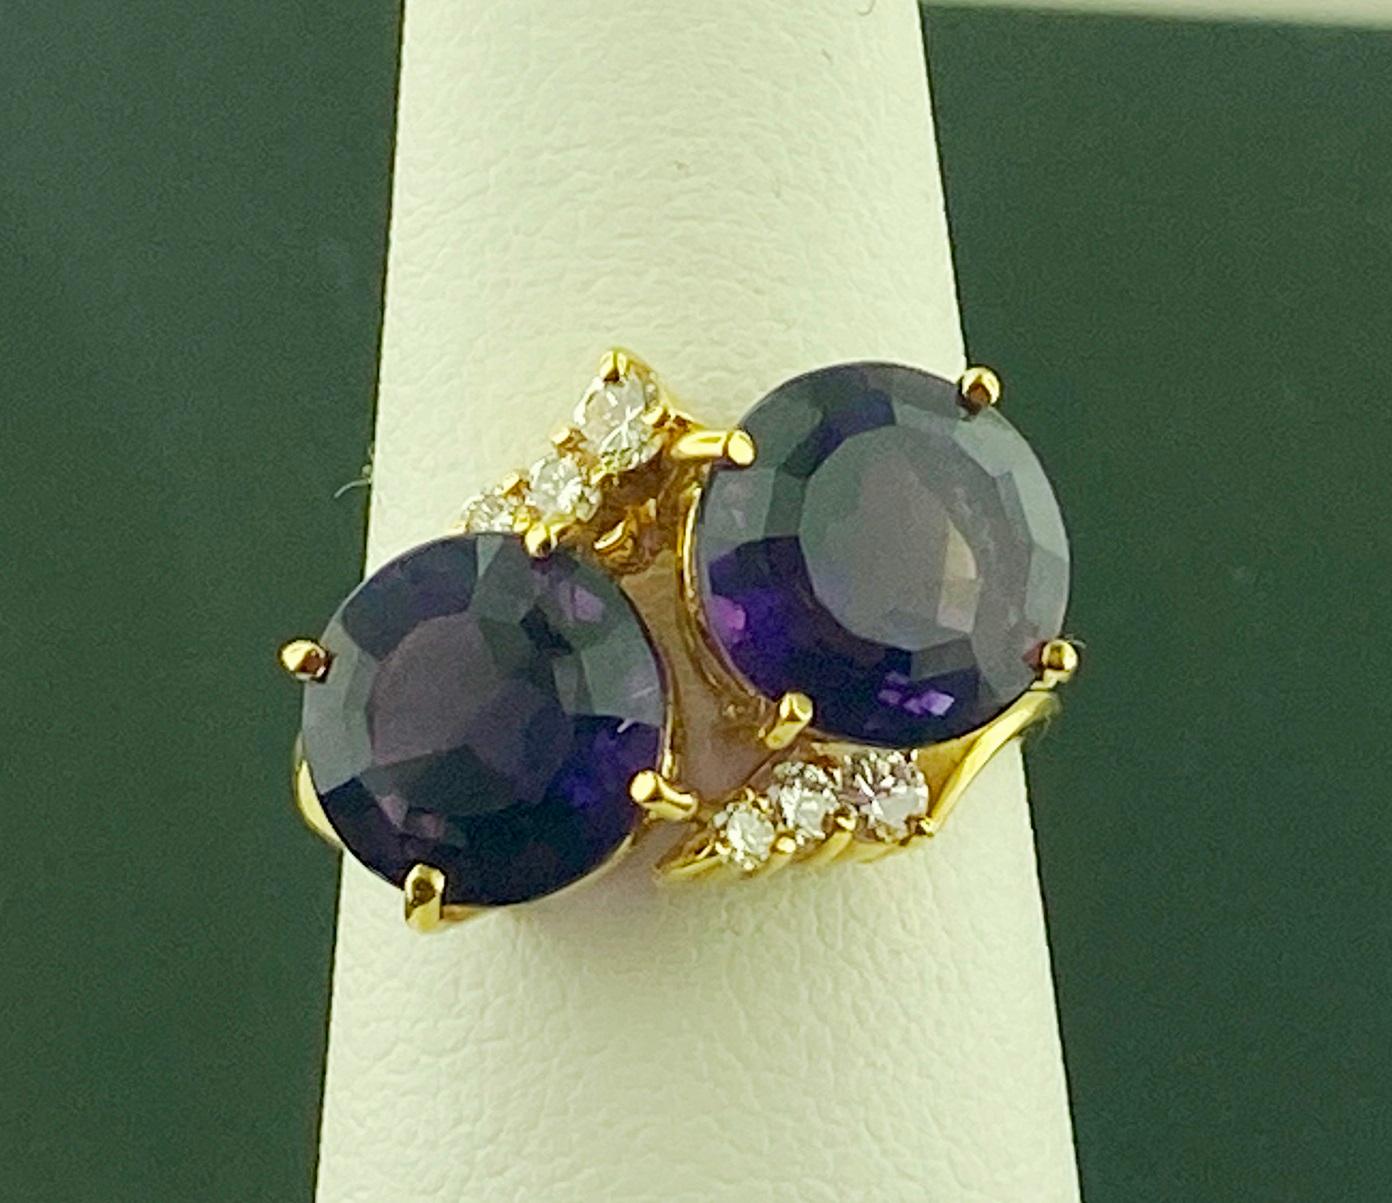 Set in 14 karat yellow gold, weighing 4.85 grams, are two Round Brilliant cut Amethysts weighing approximately 5.01 carats in total.  plus 6 Round Brilliant cut diamonds weighing approximately 0.20 carats, Color: G-H, Clarity: VS.  Ring size is 6.